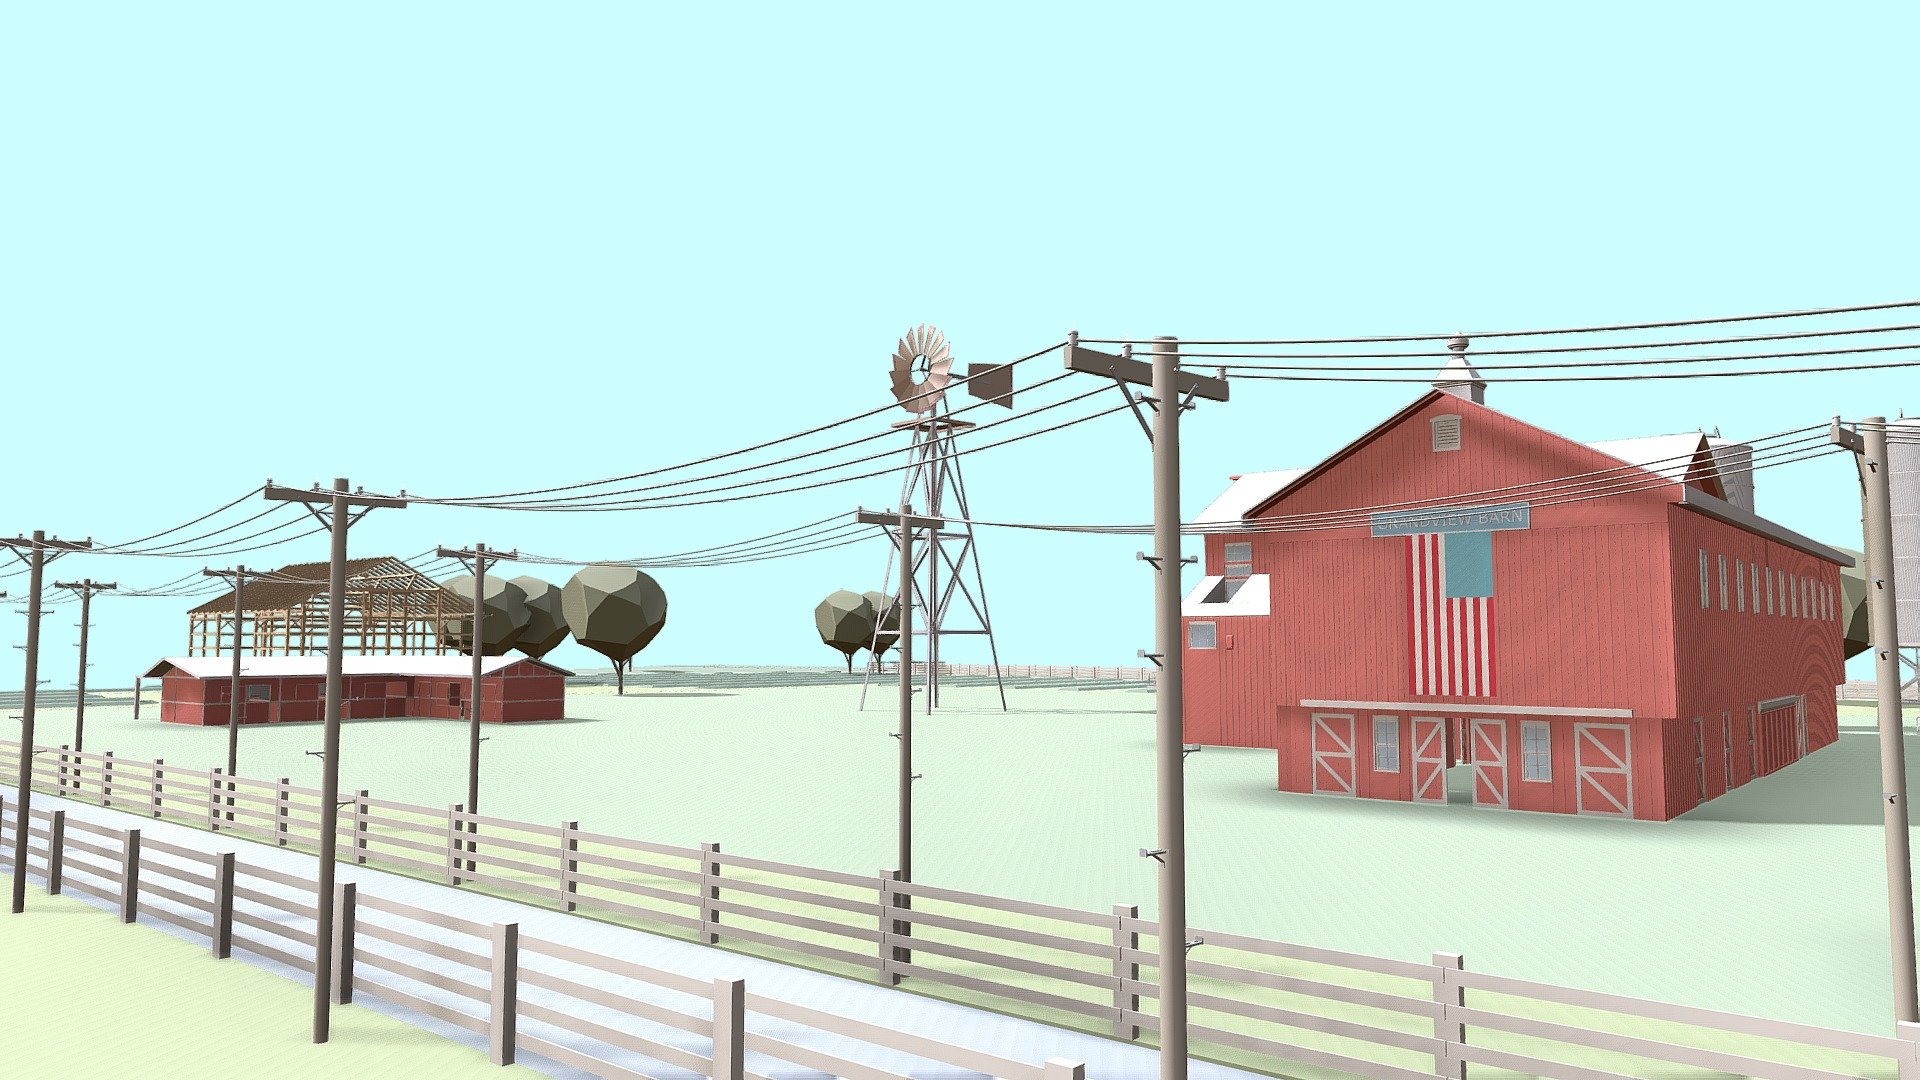 This American Farm 3D model is representation of a traditional farmstead commonly found throughout rural areas of the United States. The model depicts a large, rectangular farmhouse made of wood or stone with a pitched roof, multiple windows, and a front porch.

The farmhouse is surrounded by several outbuildings, including a barn, a chicken coop, a silo, and a storage shed. The barn is a large, rectangular structure with a gambrel roof and multiple stalls for livestock. The silo is a tall, cylindrical structure used for storing grain, and the storage shed is a smaller, rectangular building used for storing tools and equipment.

The farm is set within a rural landscape, featuring rolling hills, fields of crops, and grazing pastures for livestock. The model depicts the various crops grown on the farm. The fields are divided by fences and hedgerows, with a dirt road leading to the farmstead 3d model